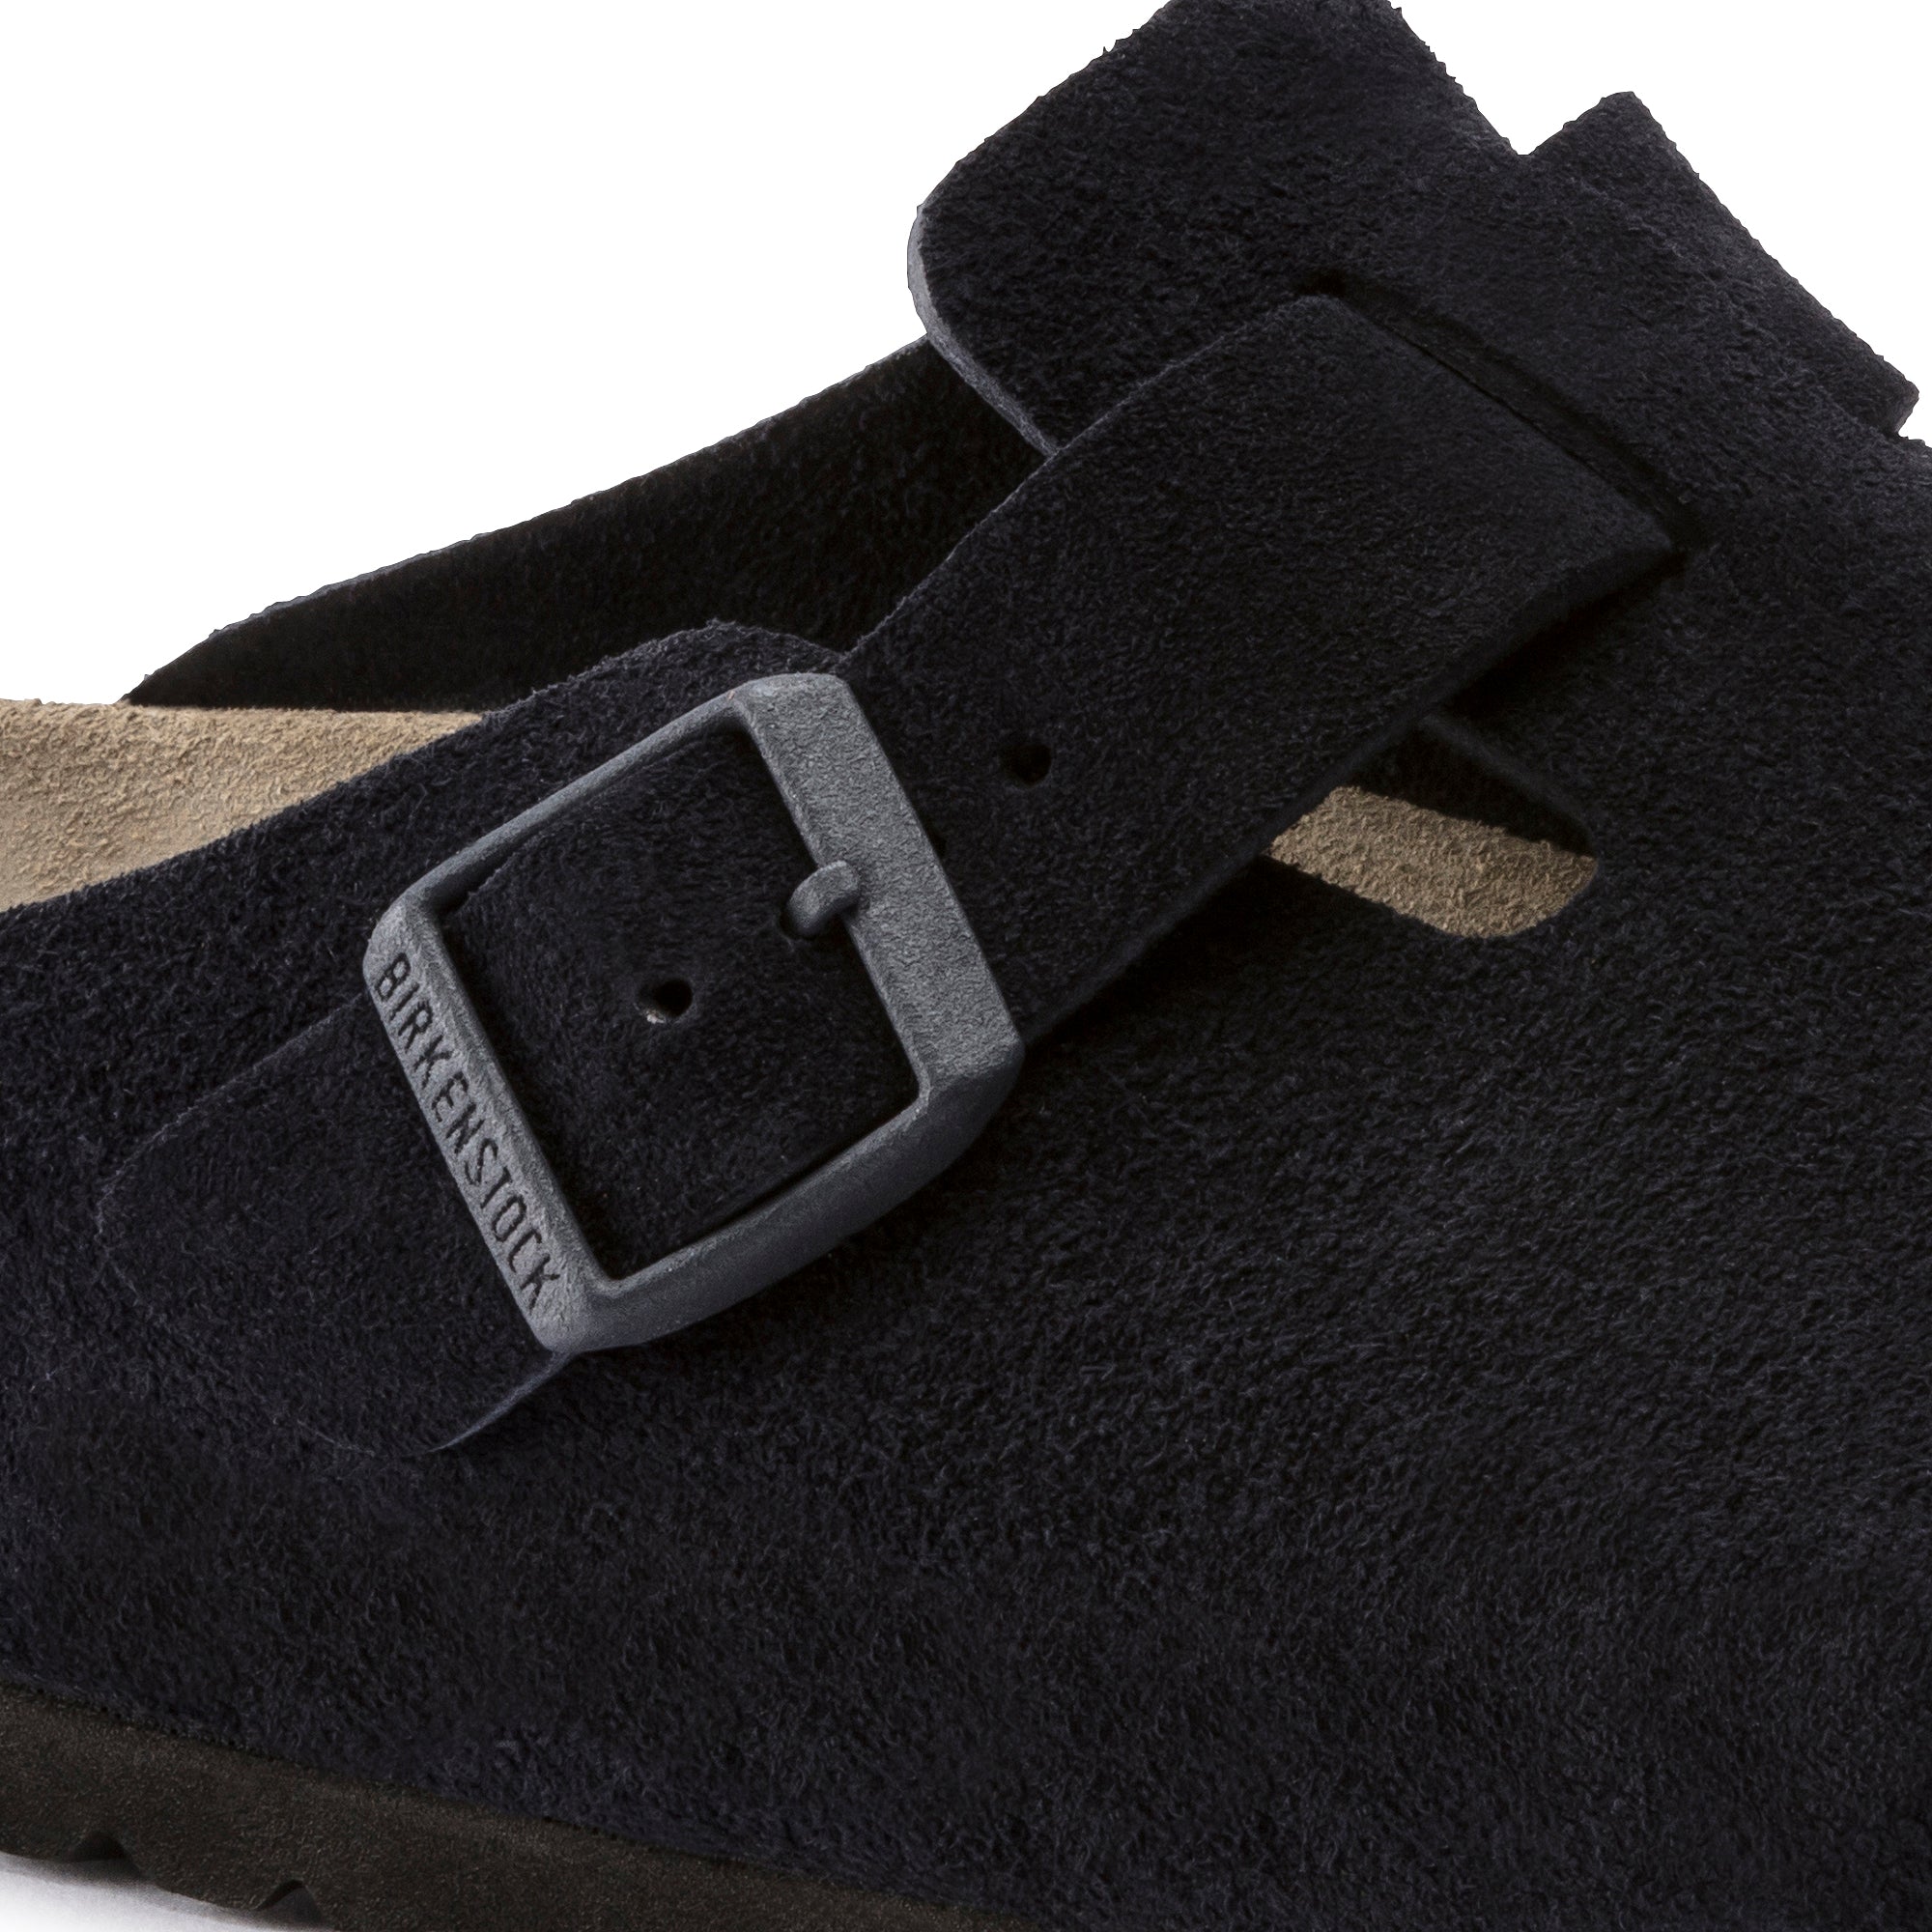 Boston Suede Leather in Midnight (Soft Footbed)